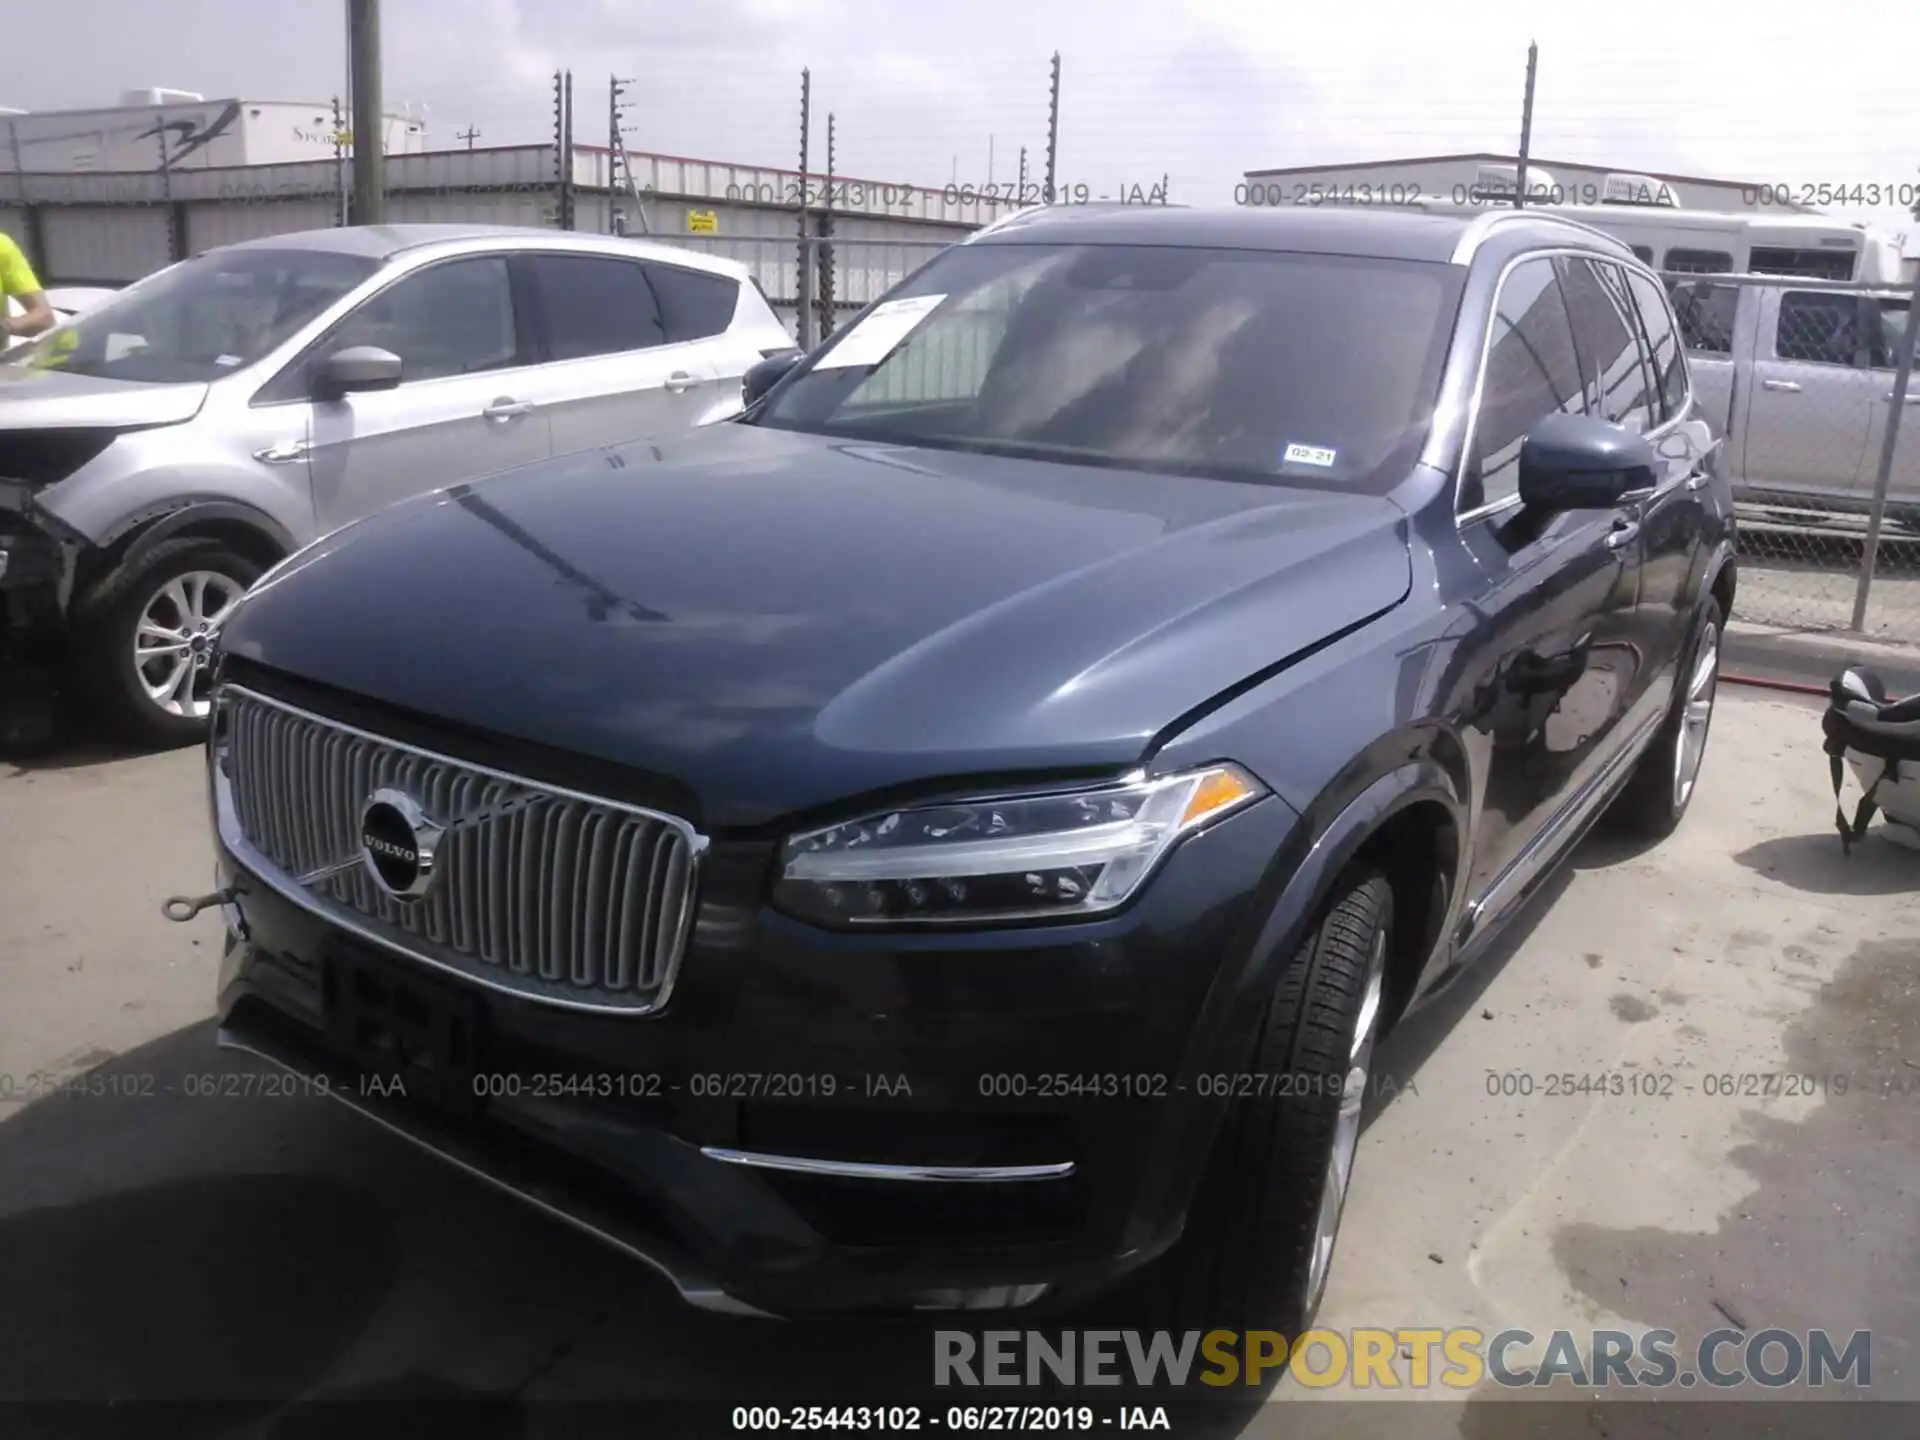 2 Photograph of a damaged car YV4A22PL4K1482573 VOLVO XC90 2019